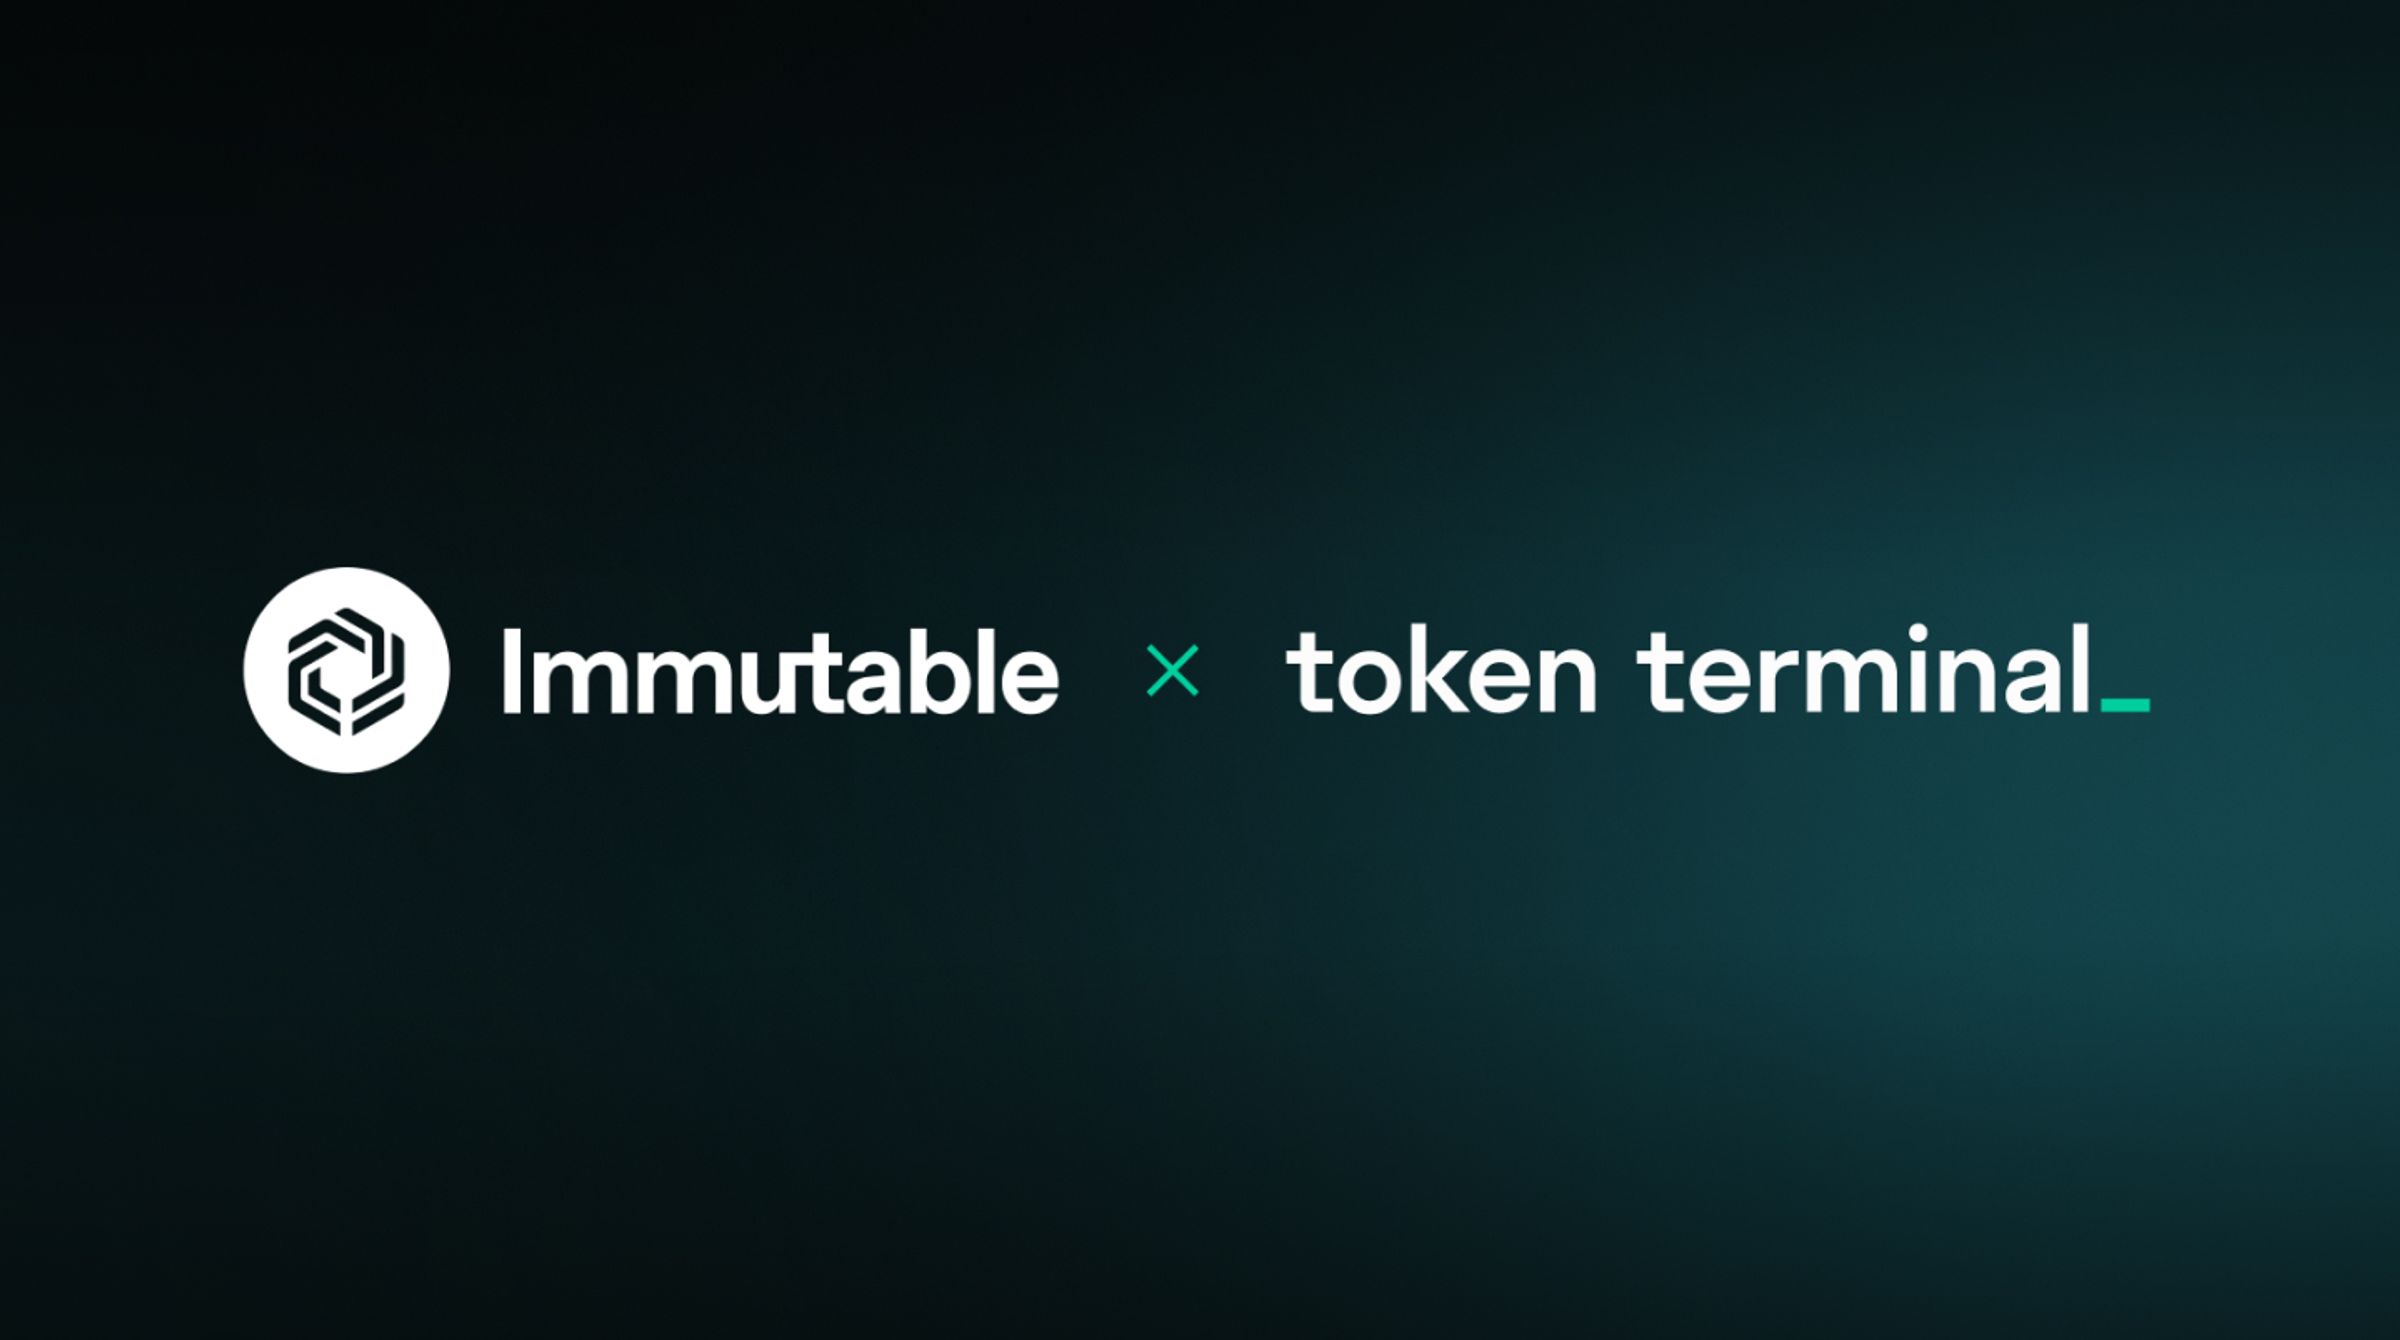 Token Terminal brings Immutable’s onchain data in front of 300,000 institutional customers